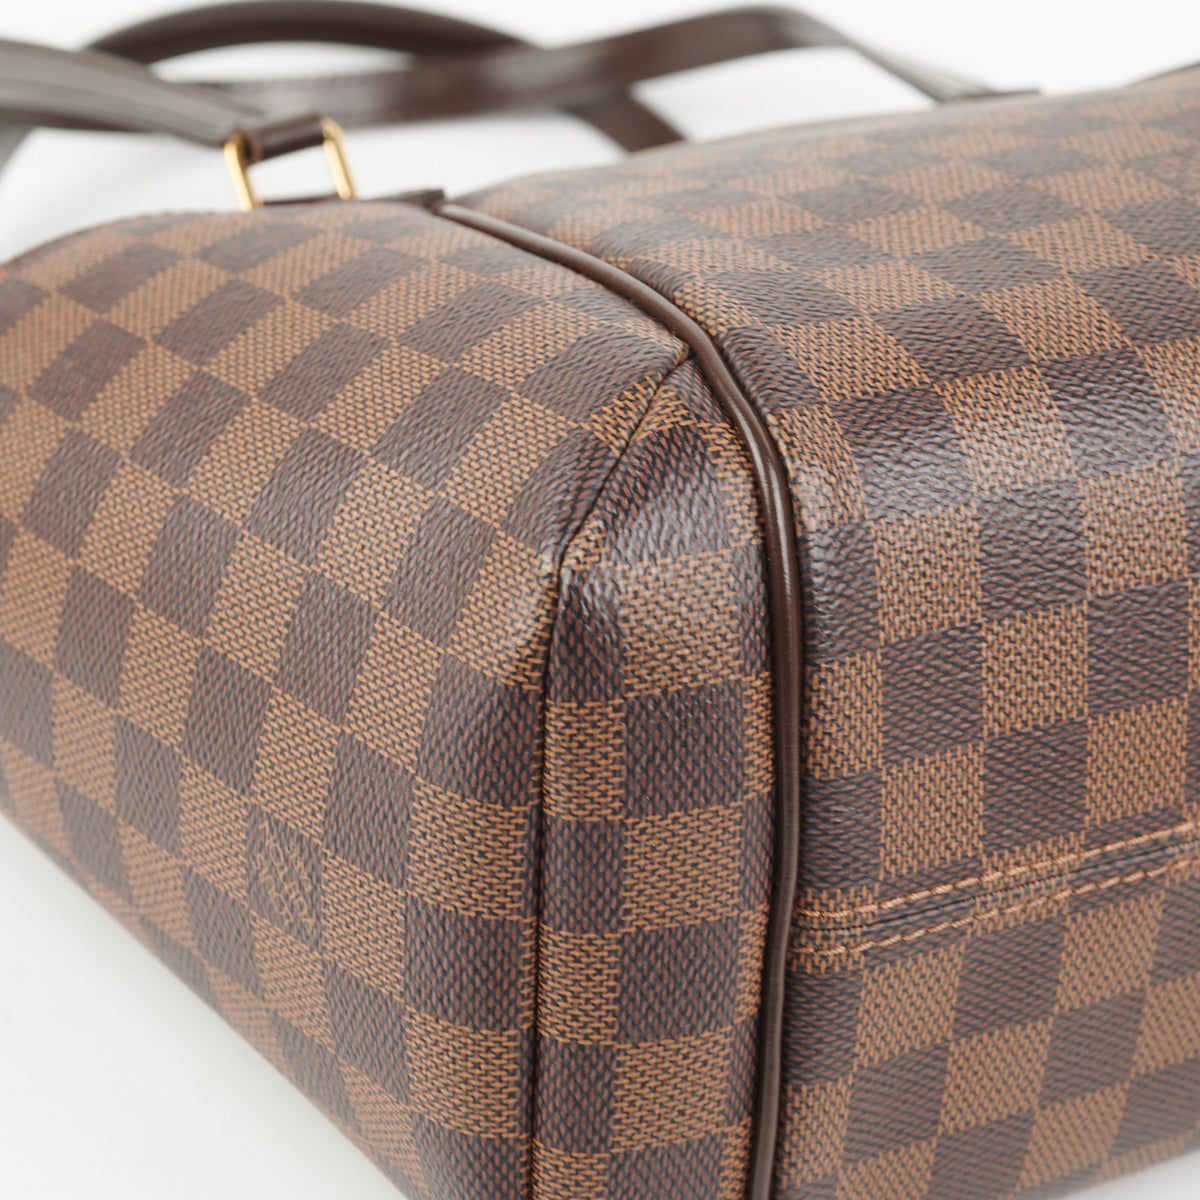 Beauty On Blog – The all new Louis Vuitton Totally PM in Damier Ebene